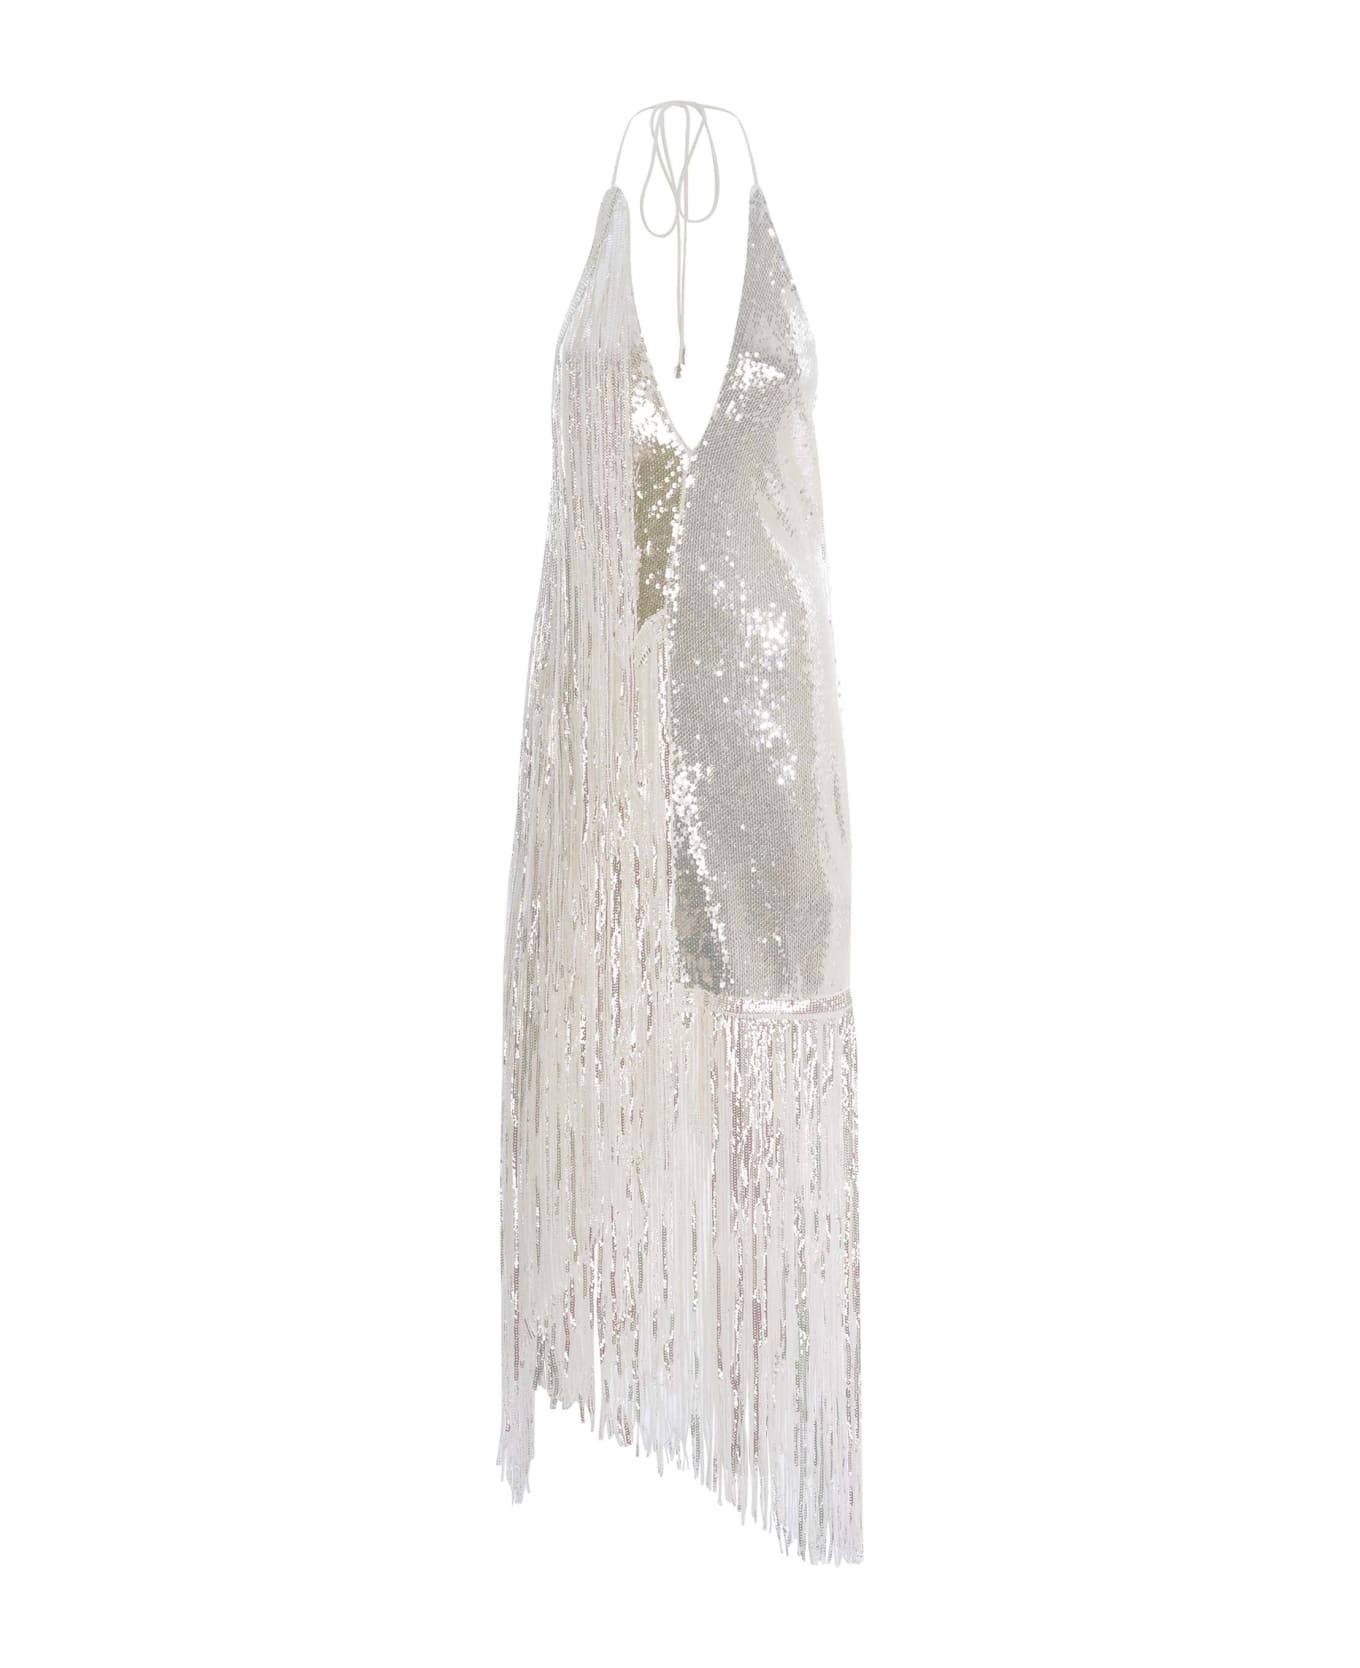 Rotate by Birger Christensen Dress Rotate Made With Fringes And Sequins - Bianco ワンピース＆ドレス